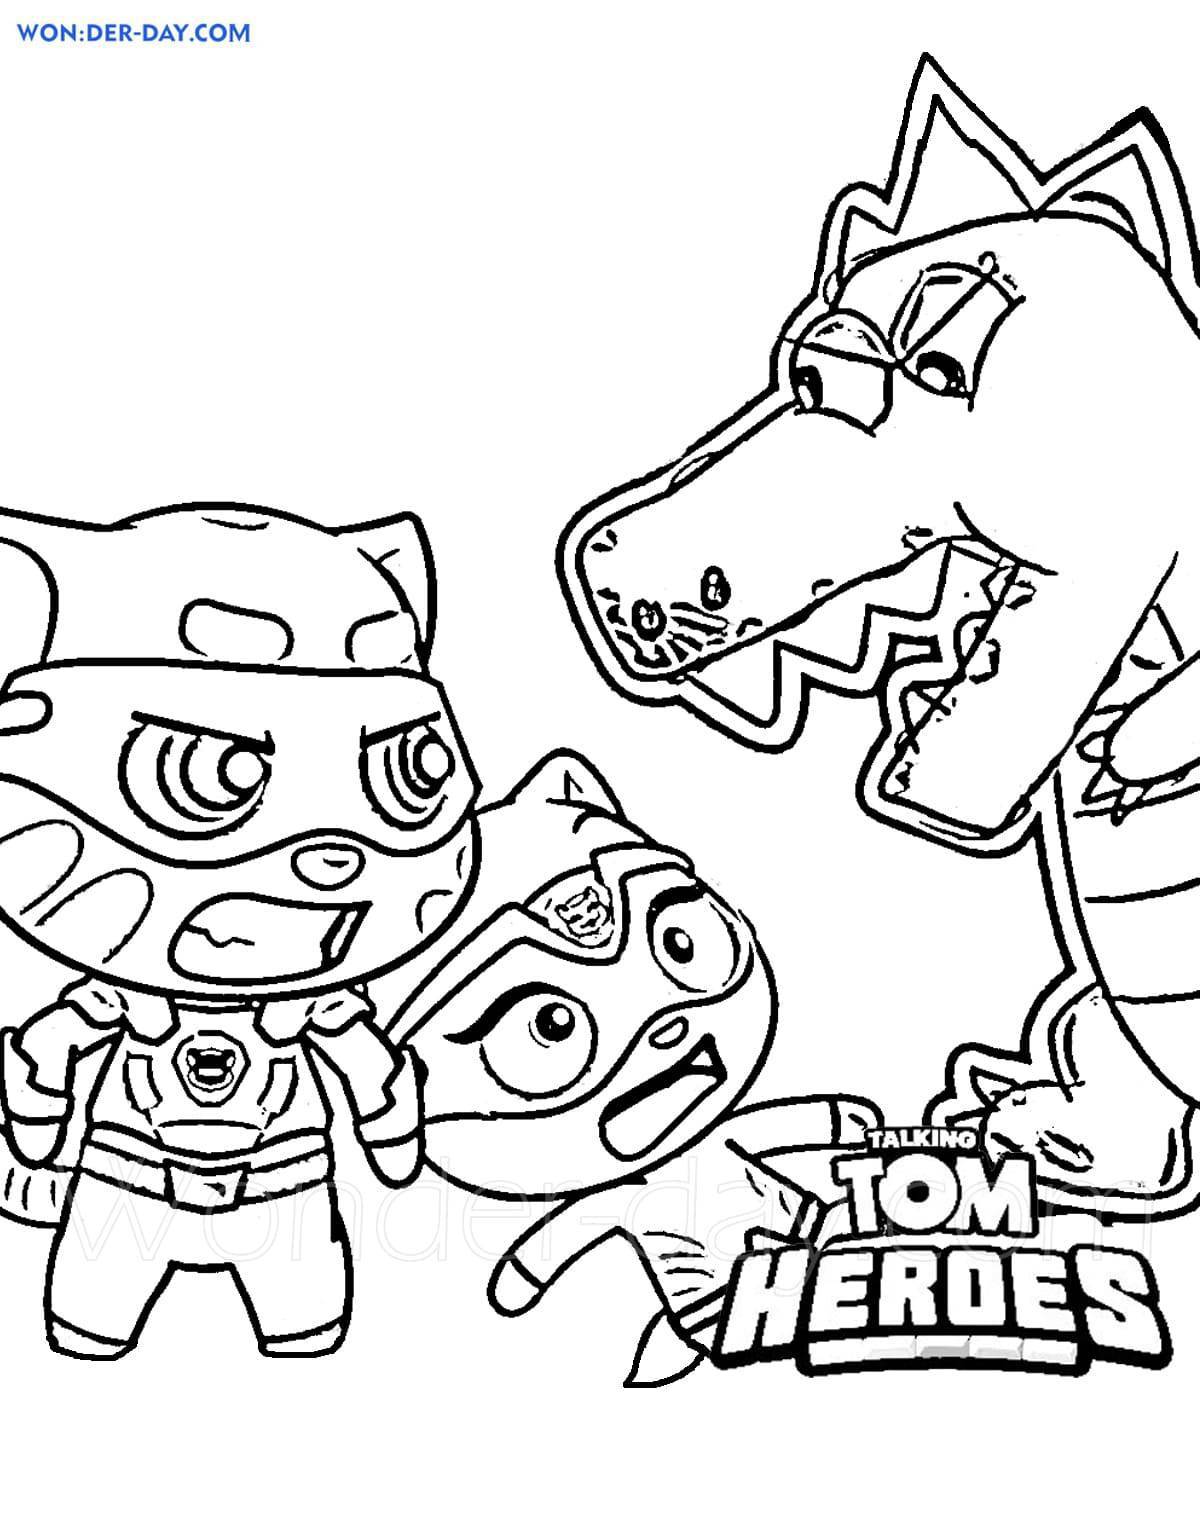 Tom's funny coloring page